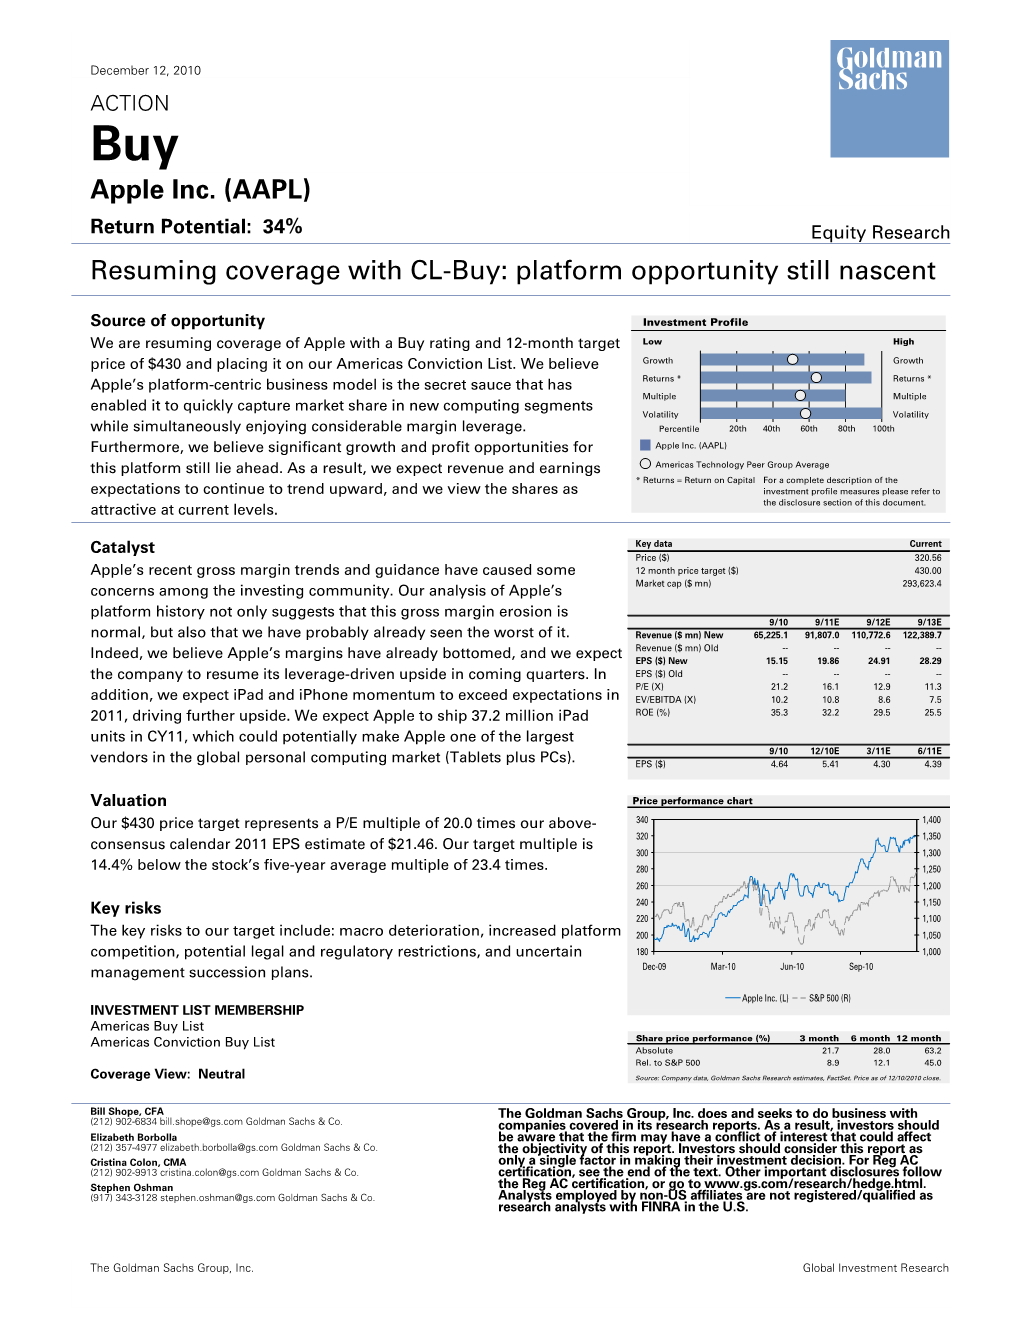 Apple Inc. (AAPL) Resuming Coverage with CL-Buy: Platform Opportunity